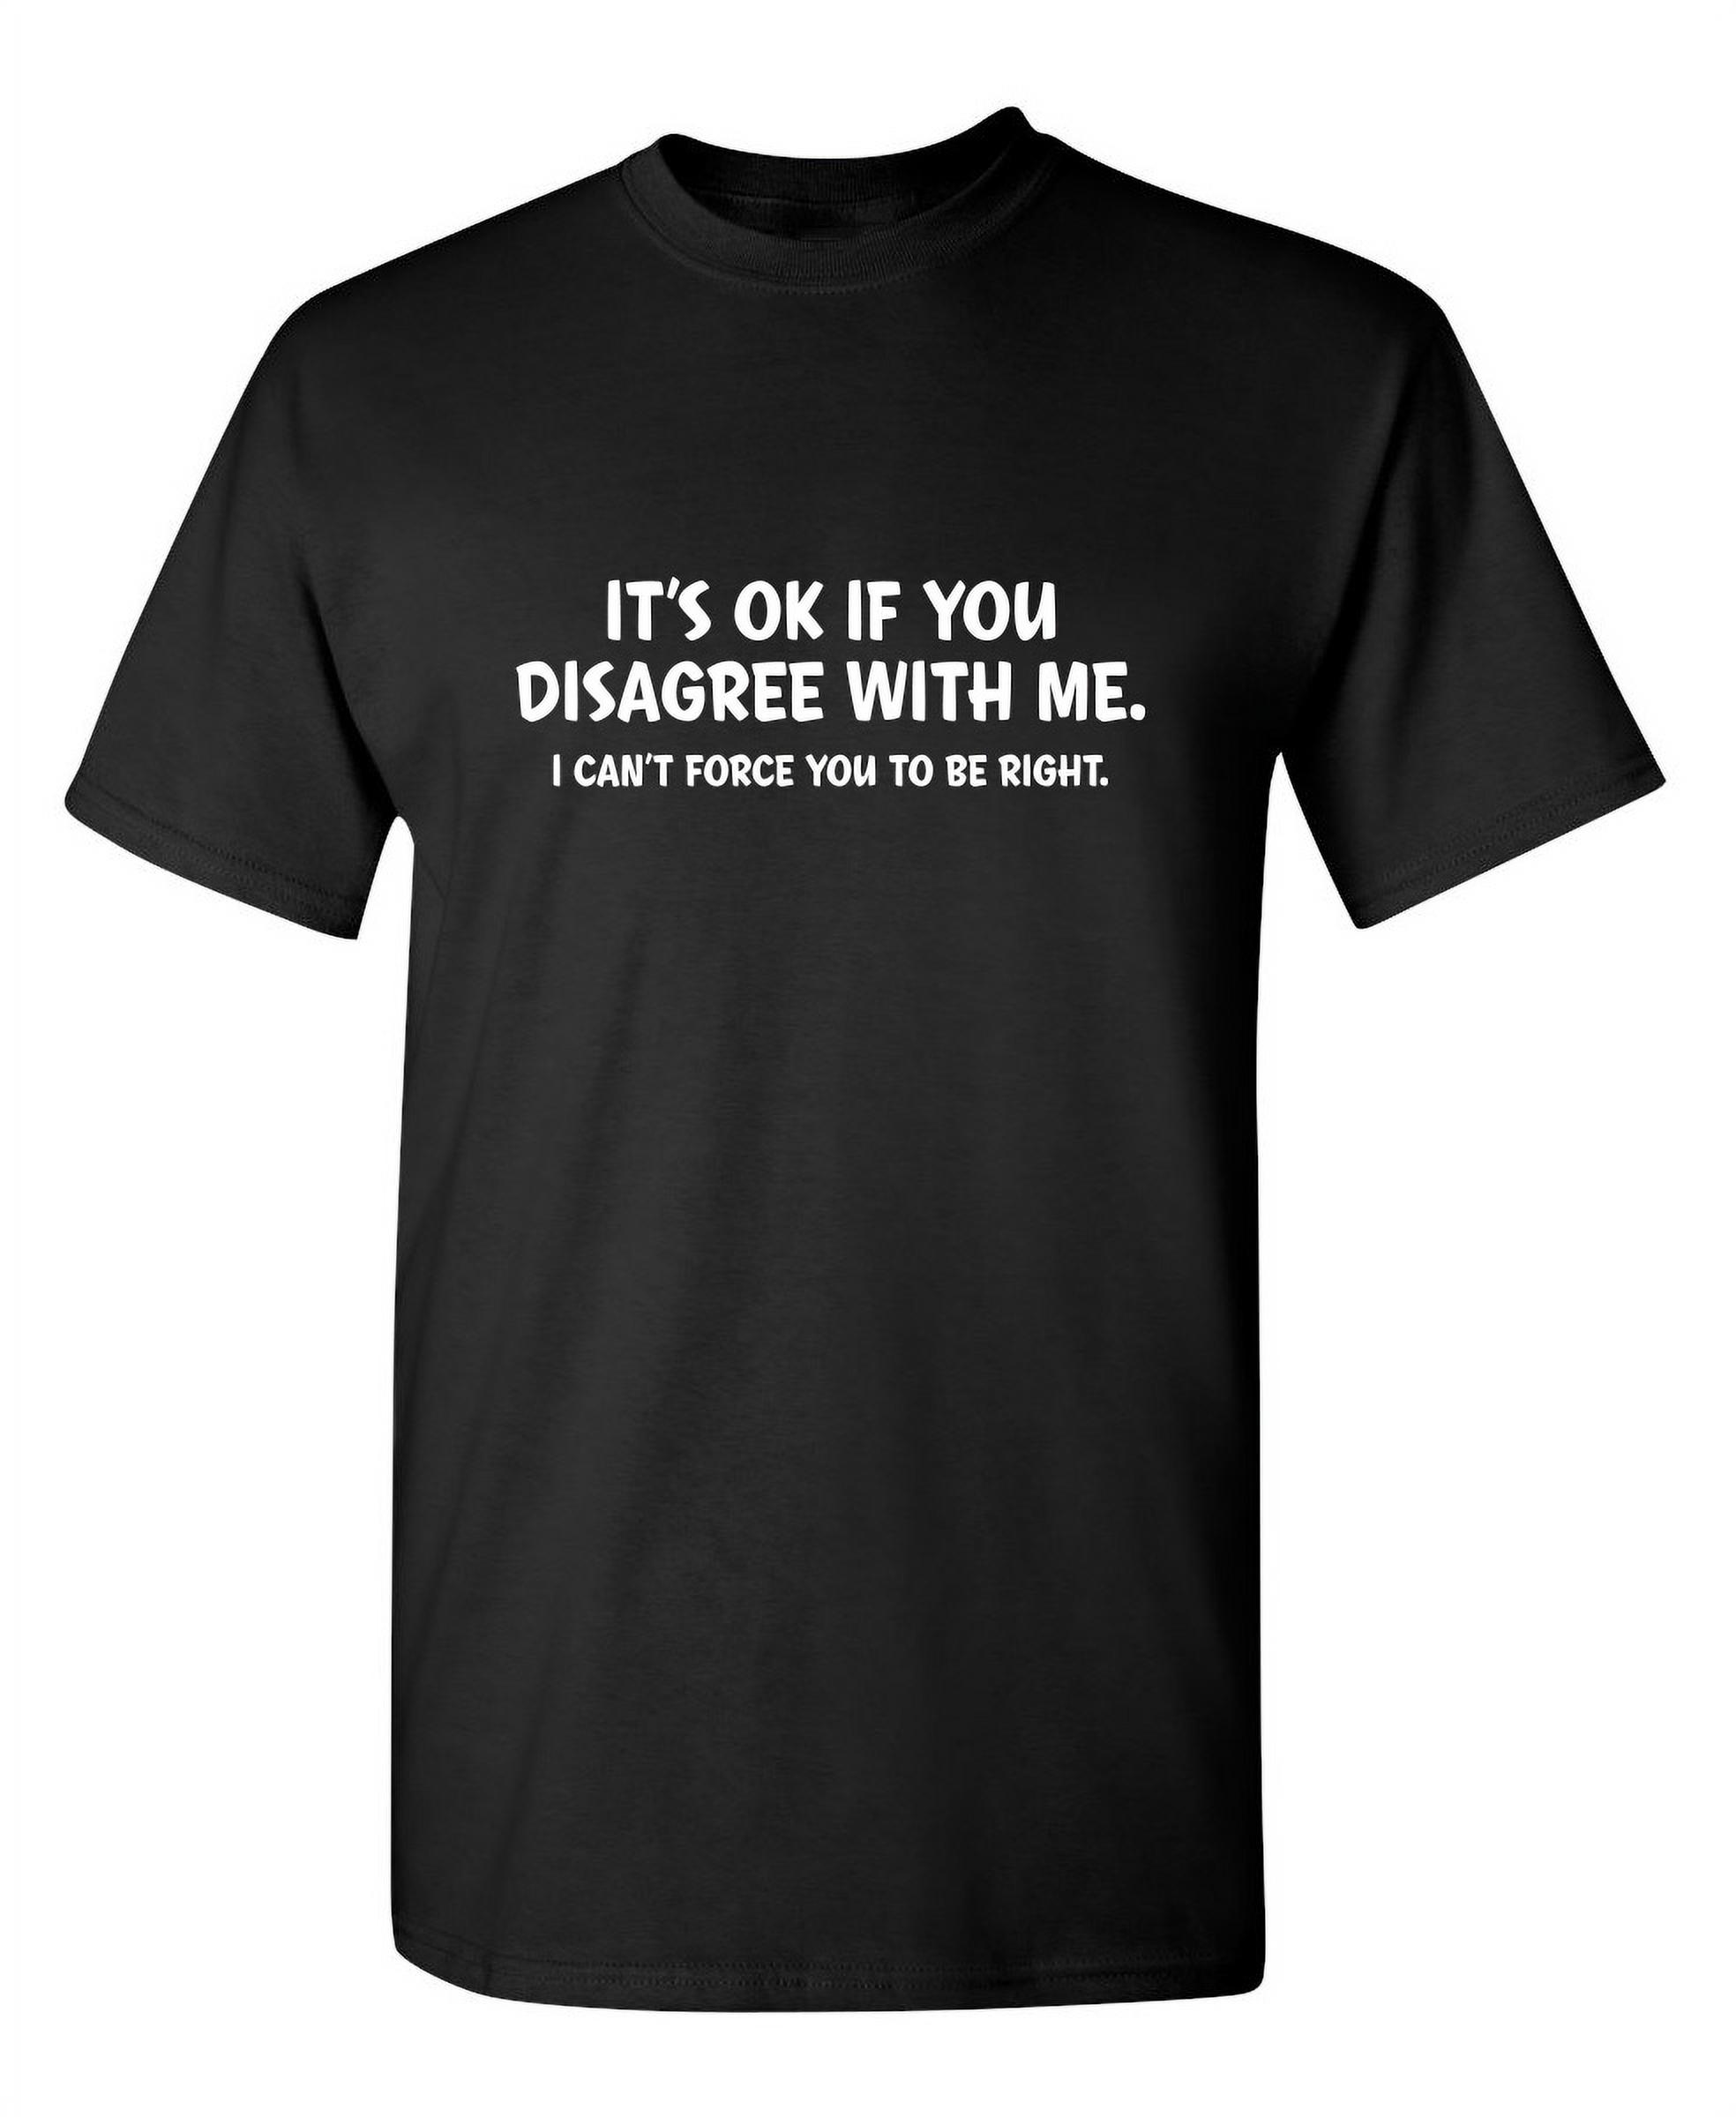 You People Must Be Exhausted From Watching Me Graphic Novelty Funny T ...